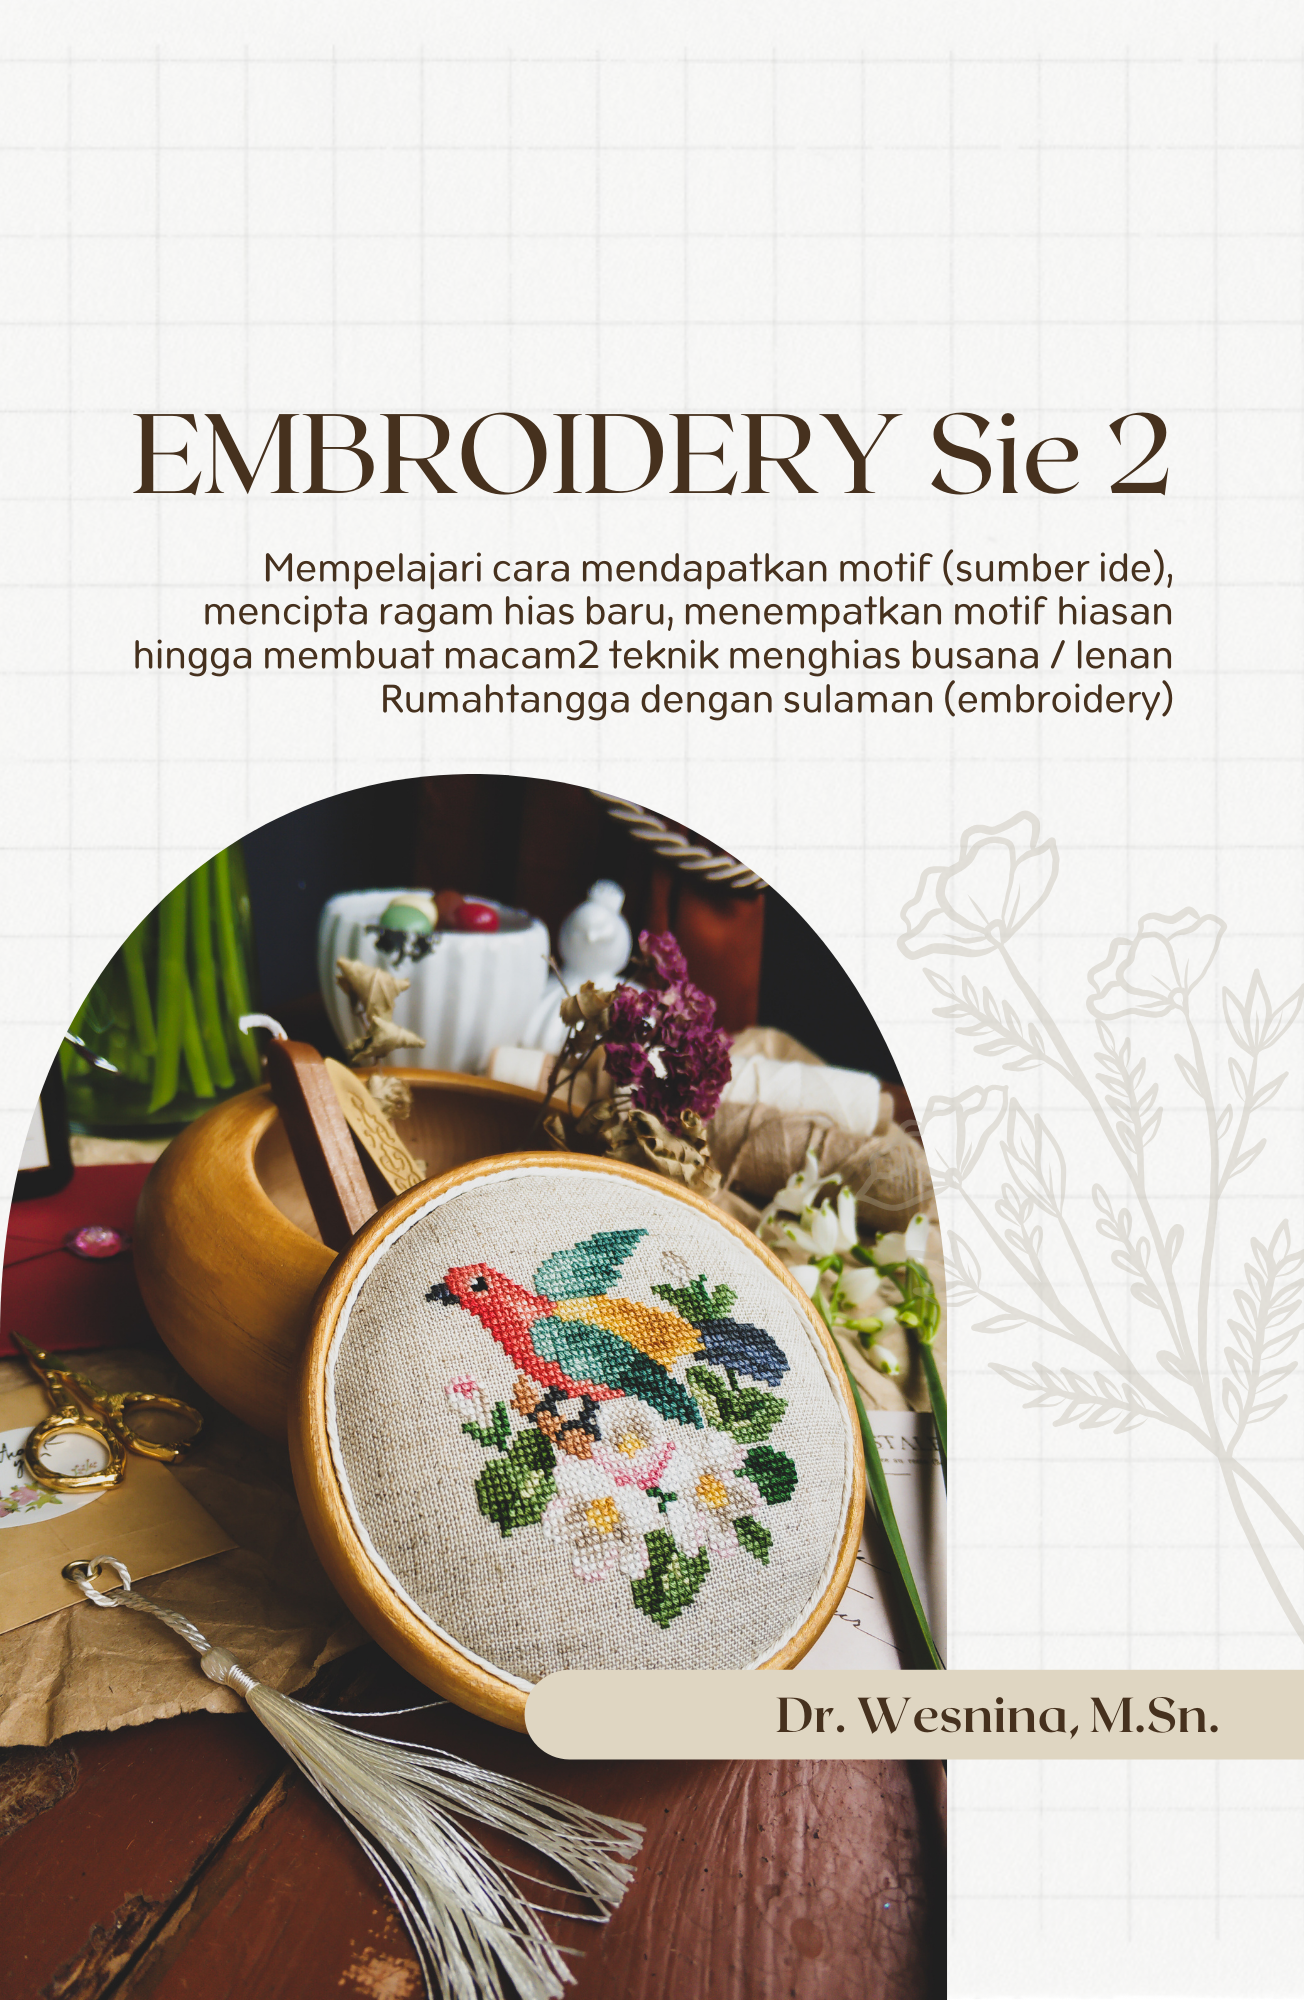 EMBROIDERY Sie 2